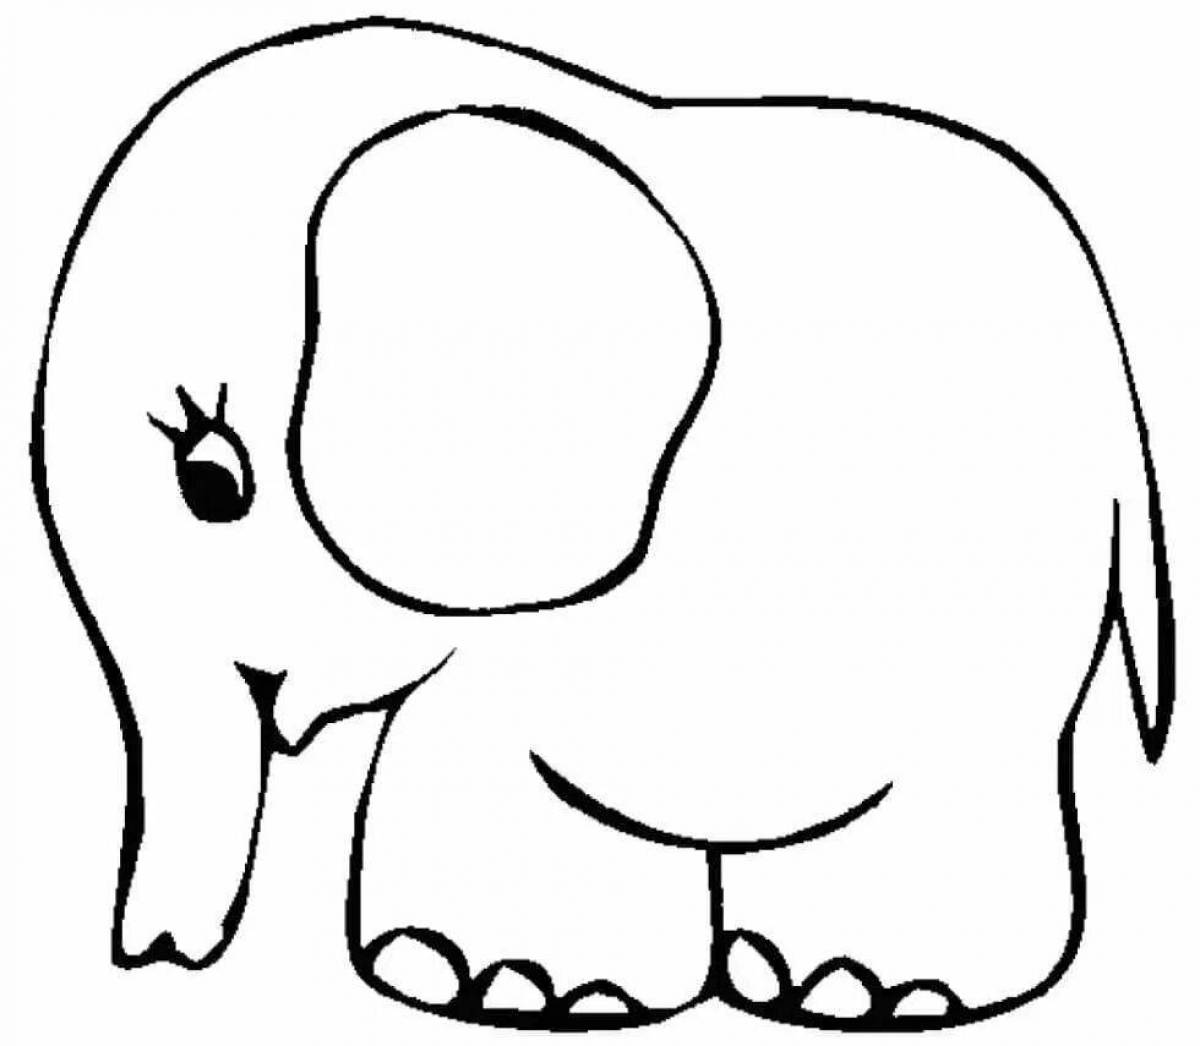 Fantastic drawing of an elephant